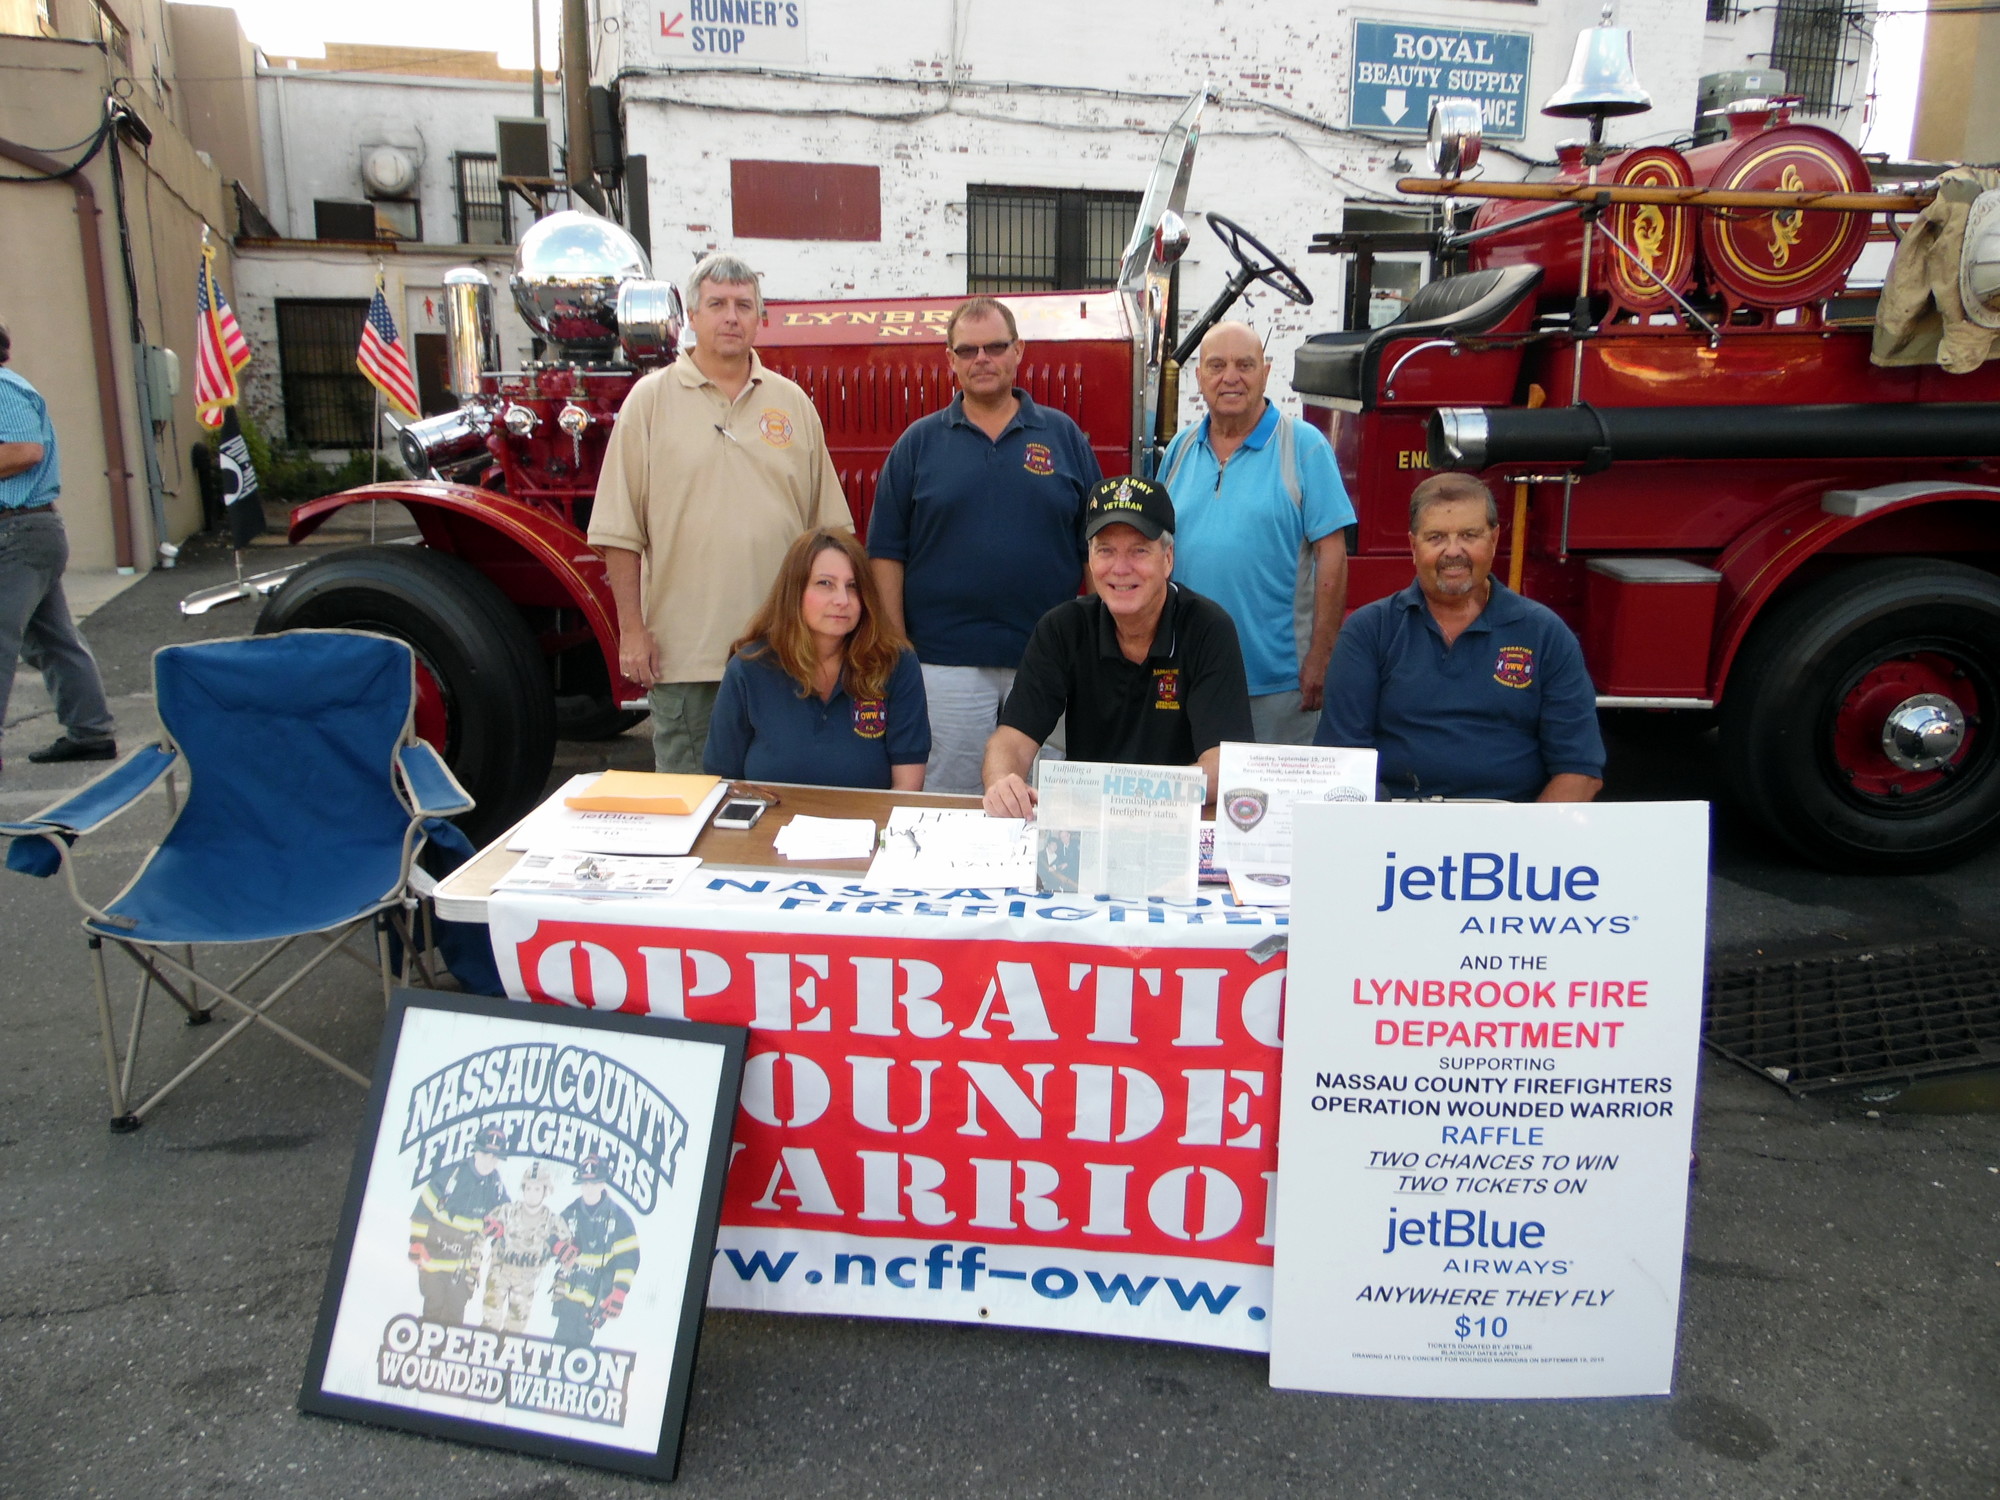 Members of the Lynbrook Fire Department manned the table to raise funds for the Nassau County Firefighters Operation Wounded Warrior. Pictured seated from left were Lynne Donnelly, Steve Grogan and Rich Straub. Standing from left were John O’Reilly, Kevin Bien and Tony Badalato.